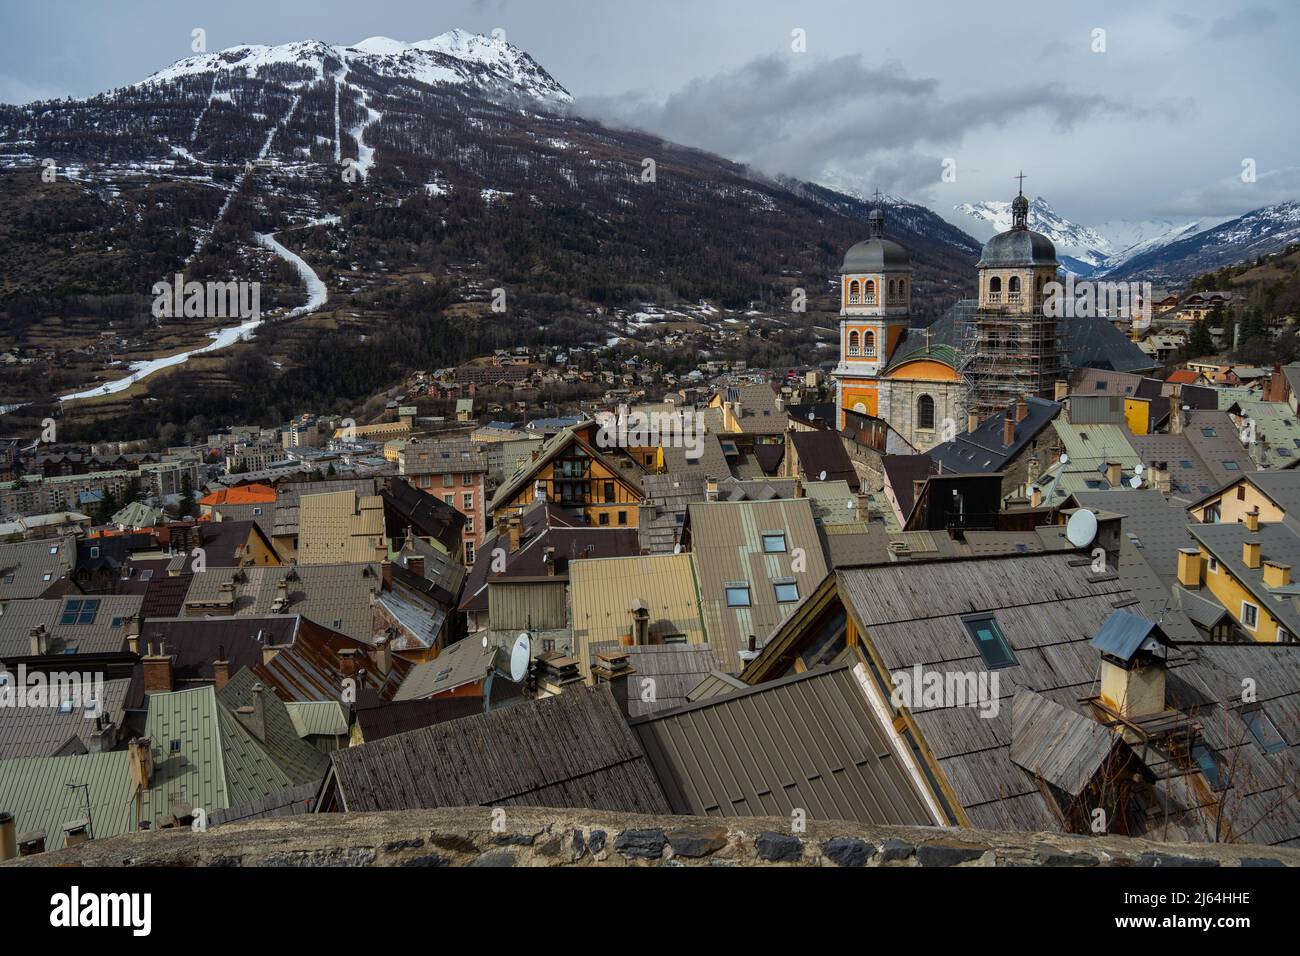 Briancon, France - 15 Mar 2022: View of Briancon from above with the Collegiate Church of Our Lady and Saint Nicholas and the Alps in the background Stock Photo